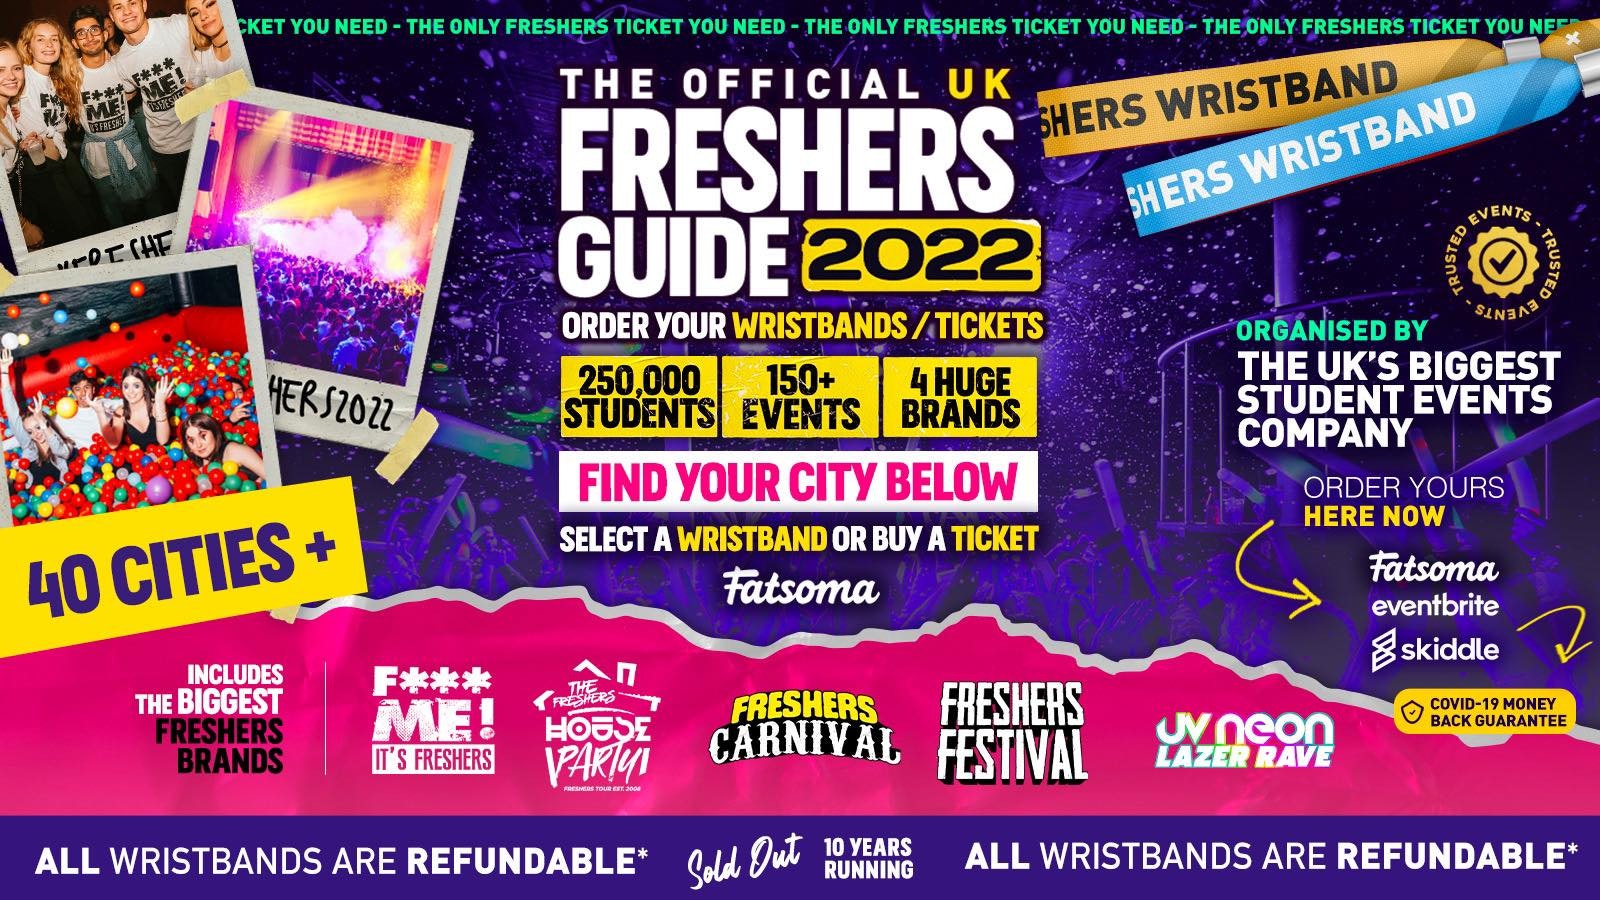 🔥 90% SOLD OUT 🔥 – The 2022 UK Freshers Week Guide 🎉 | Presented by Your Freshers Guide! – ⬇️ SELECT YOUR CITY BELOW ⬇️